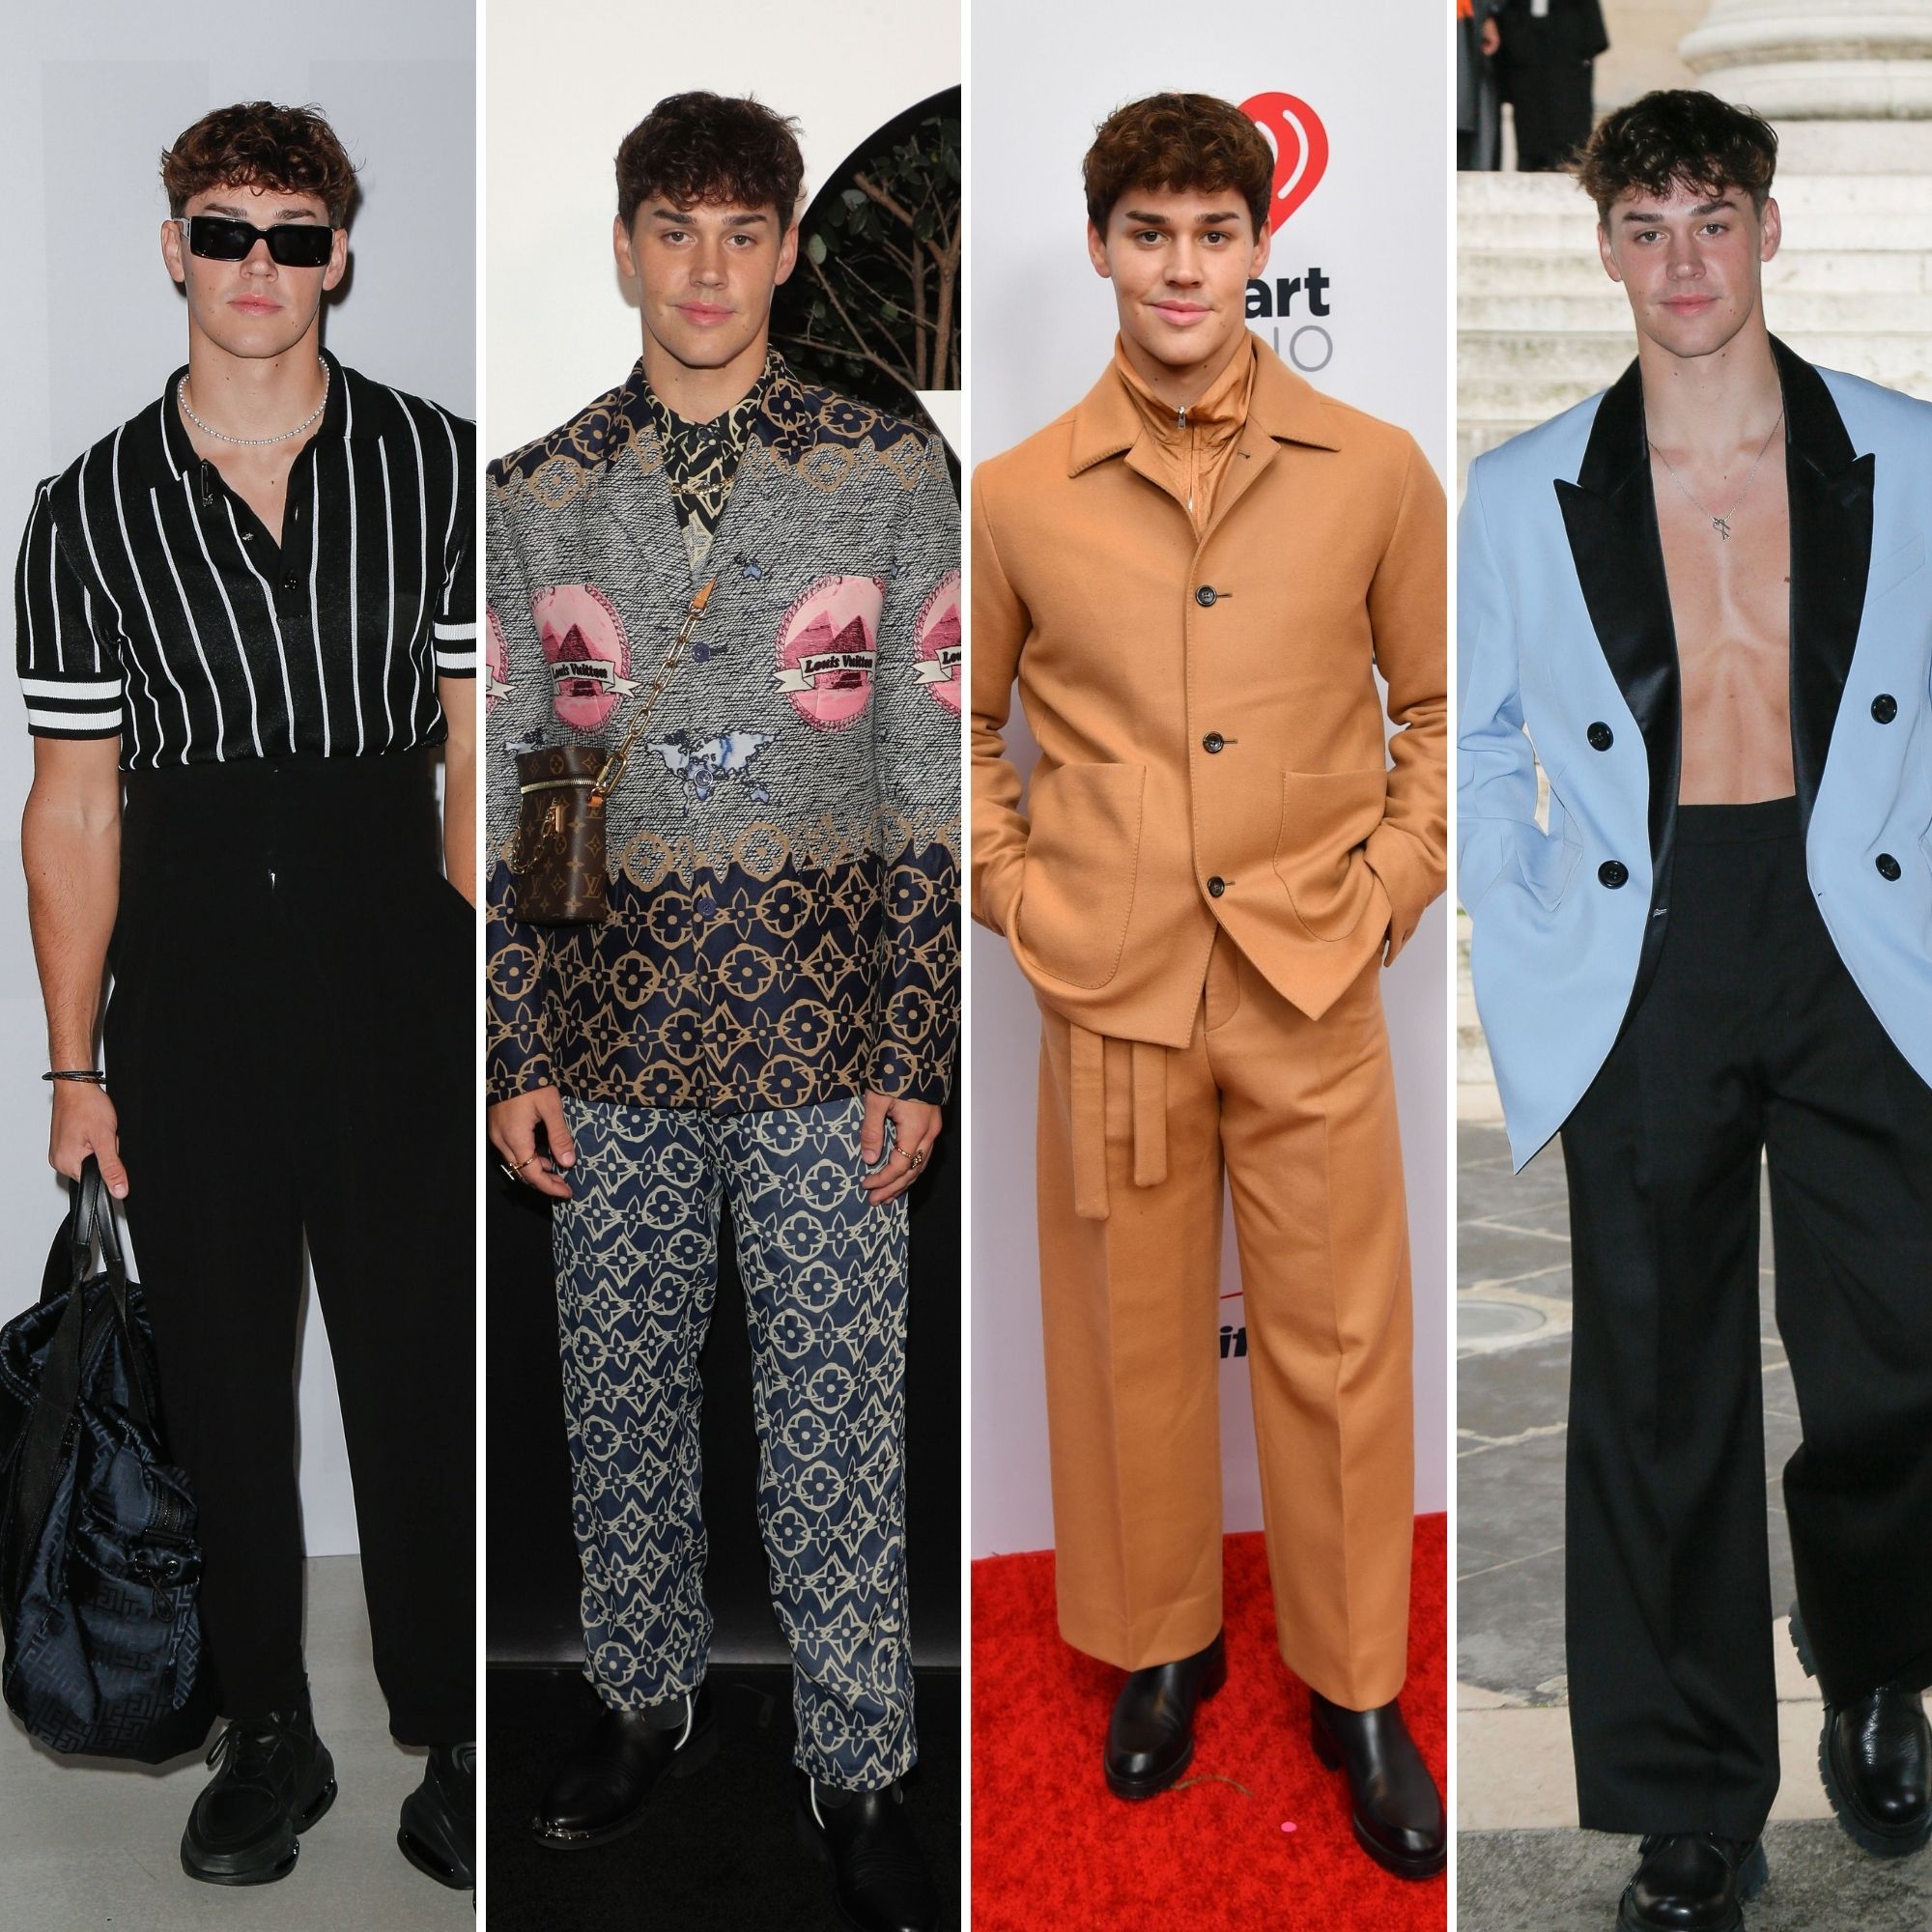 Noah Beck's Best Style Moments: Photos of His Looks, Outfits | J-14